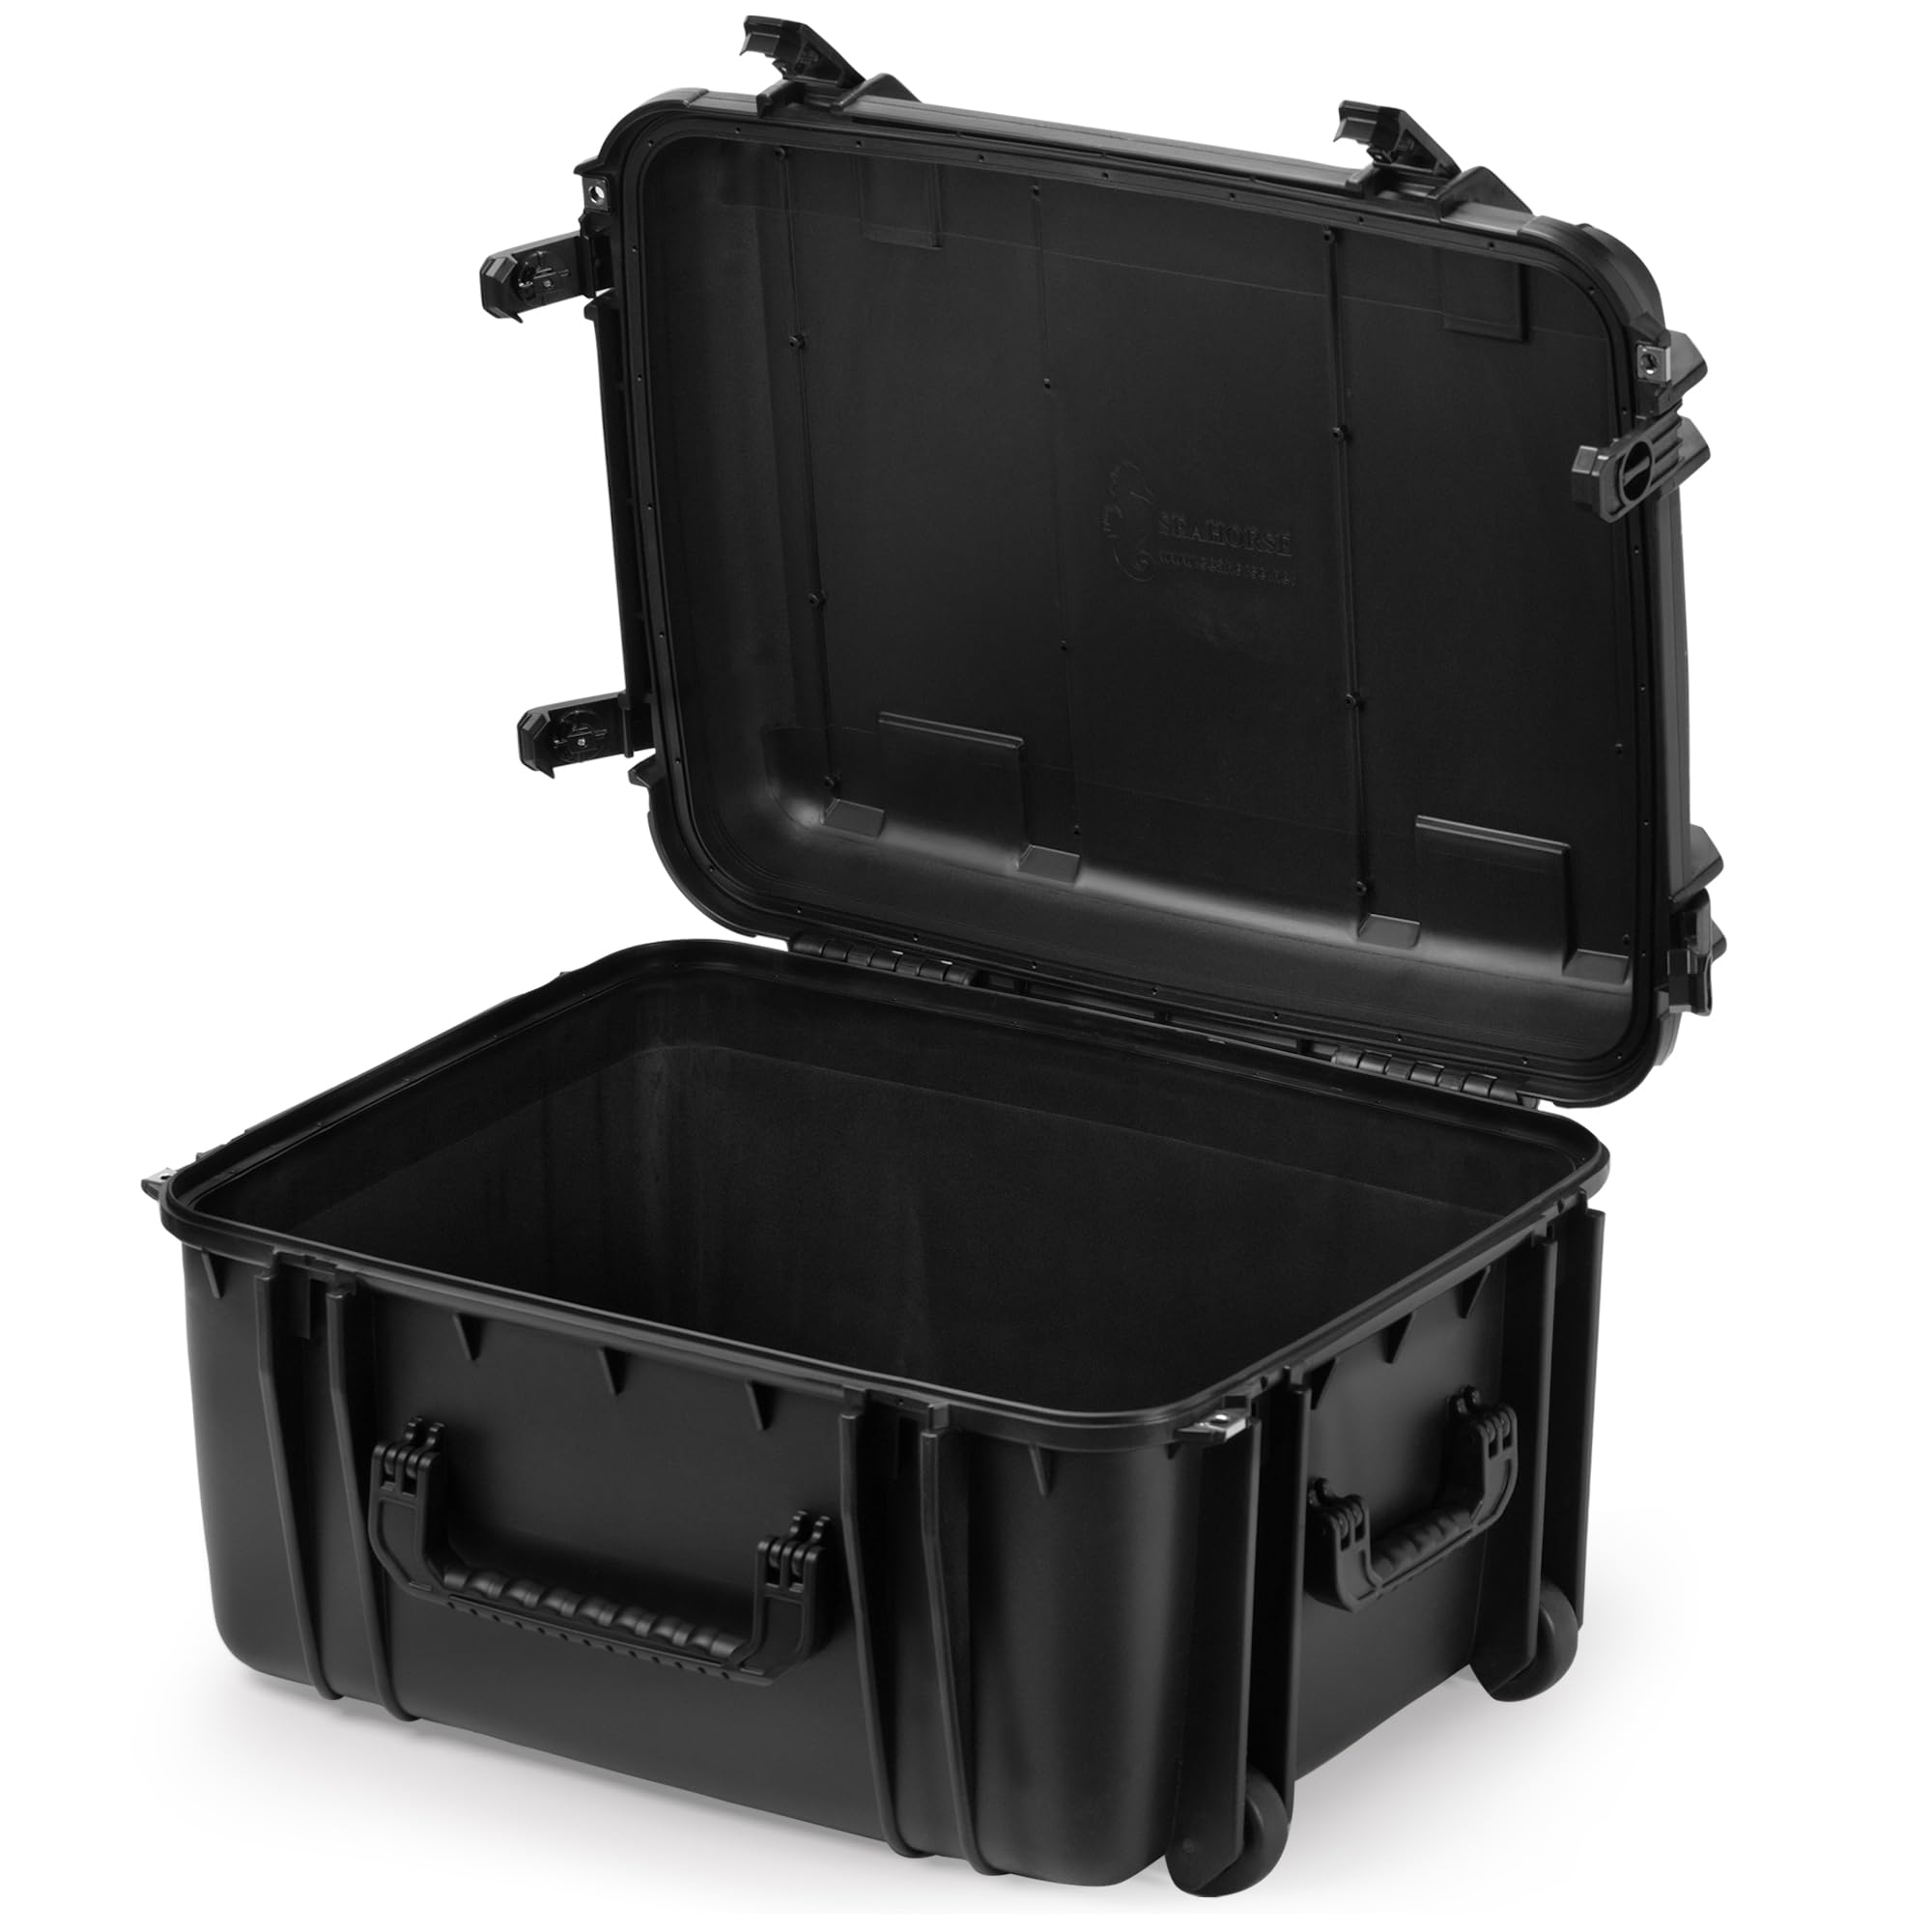 Seahorse 1220 Heavy Duty Hard Protective Equipment Crate - TSA Approved/Mil Spec / IP67 Waterproof/USA Made for Telescopes, Drones, Monitors, PC’s, Gimbal, Diving Equipment